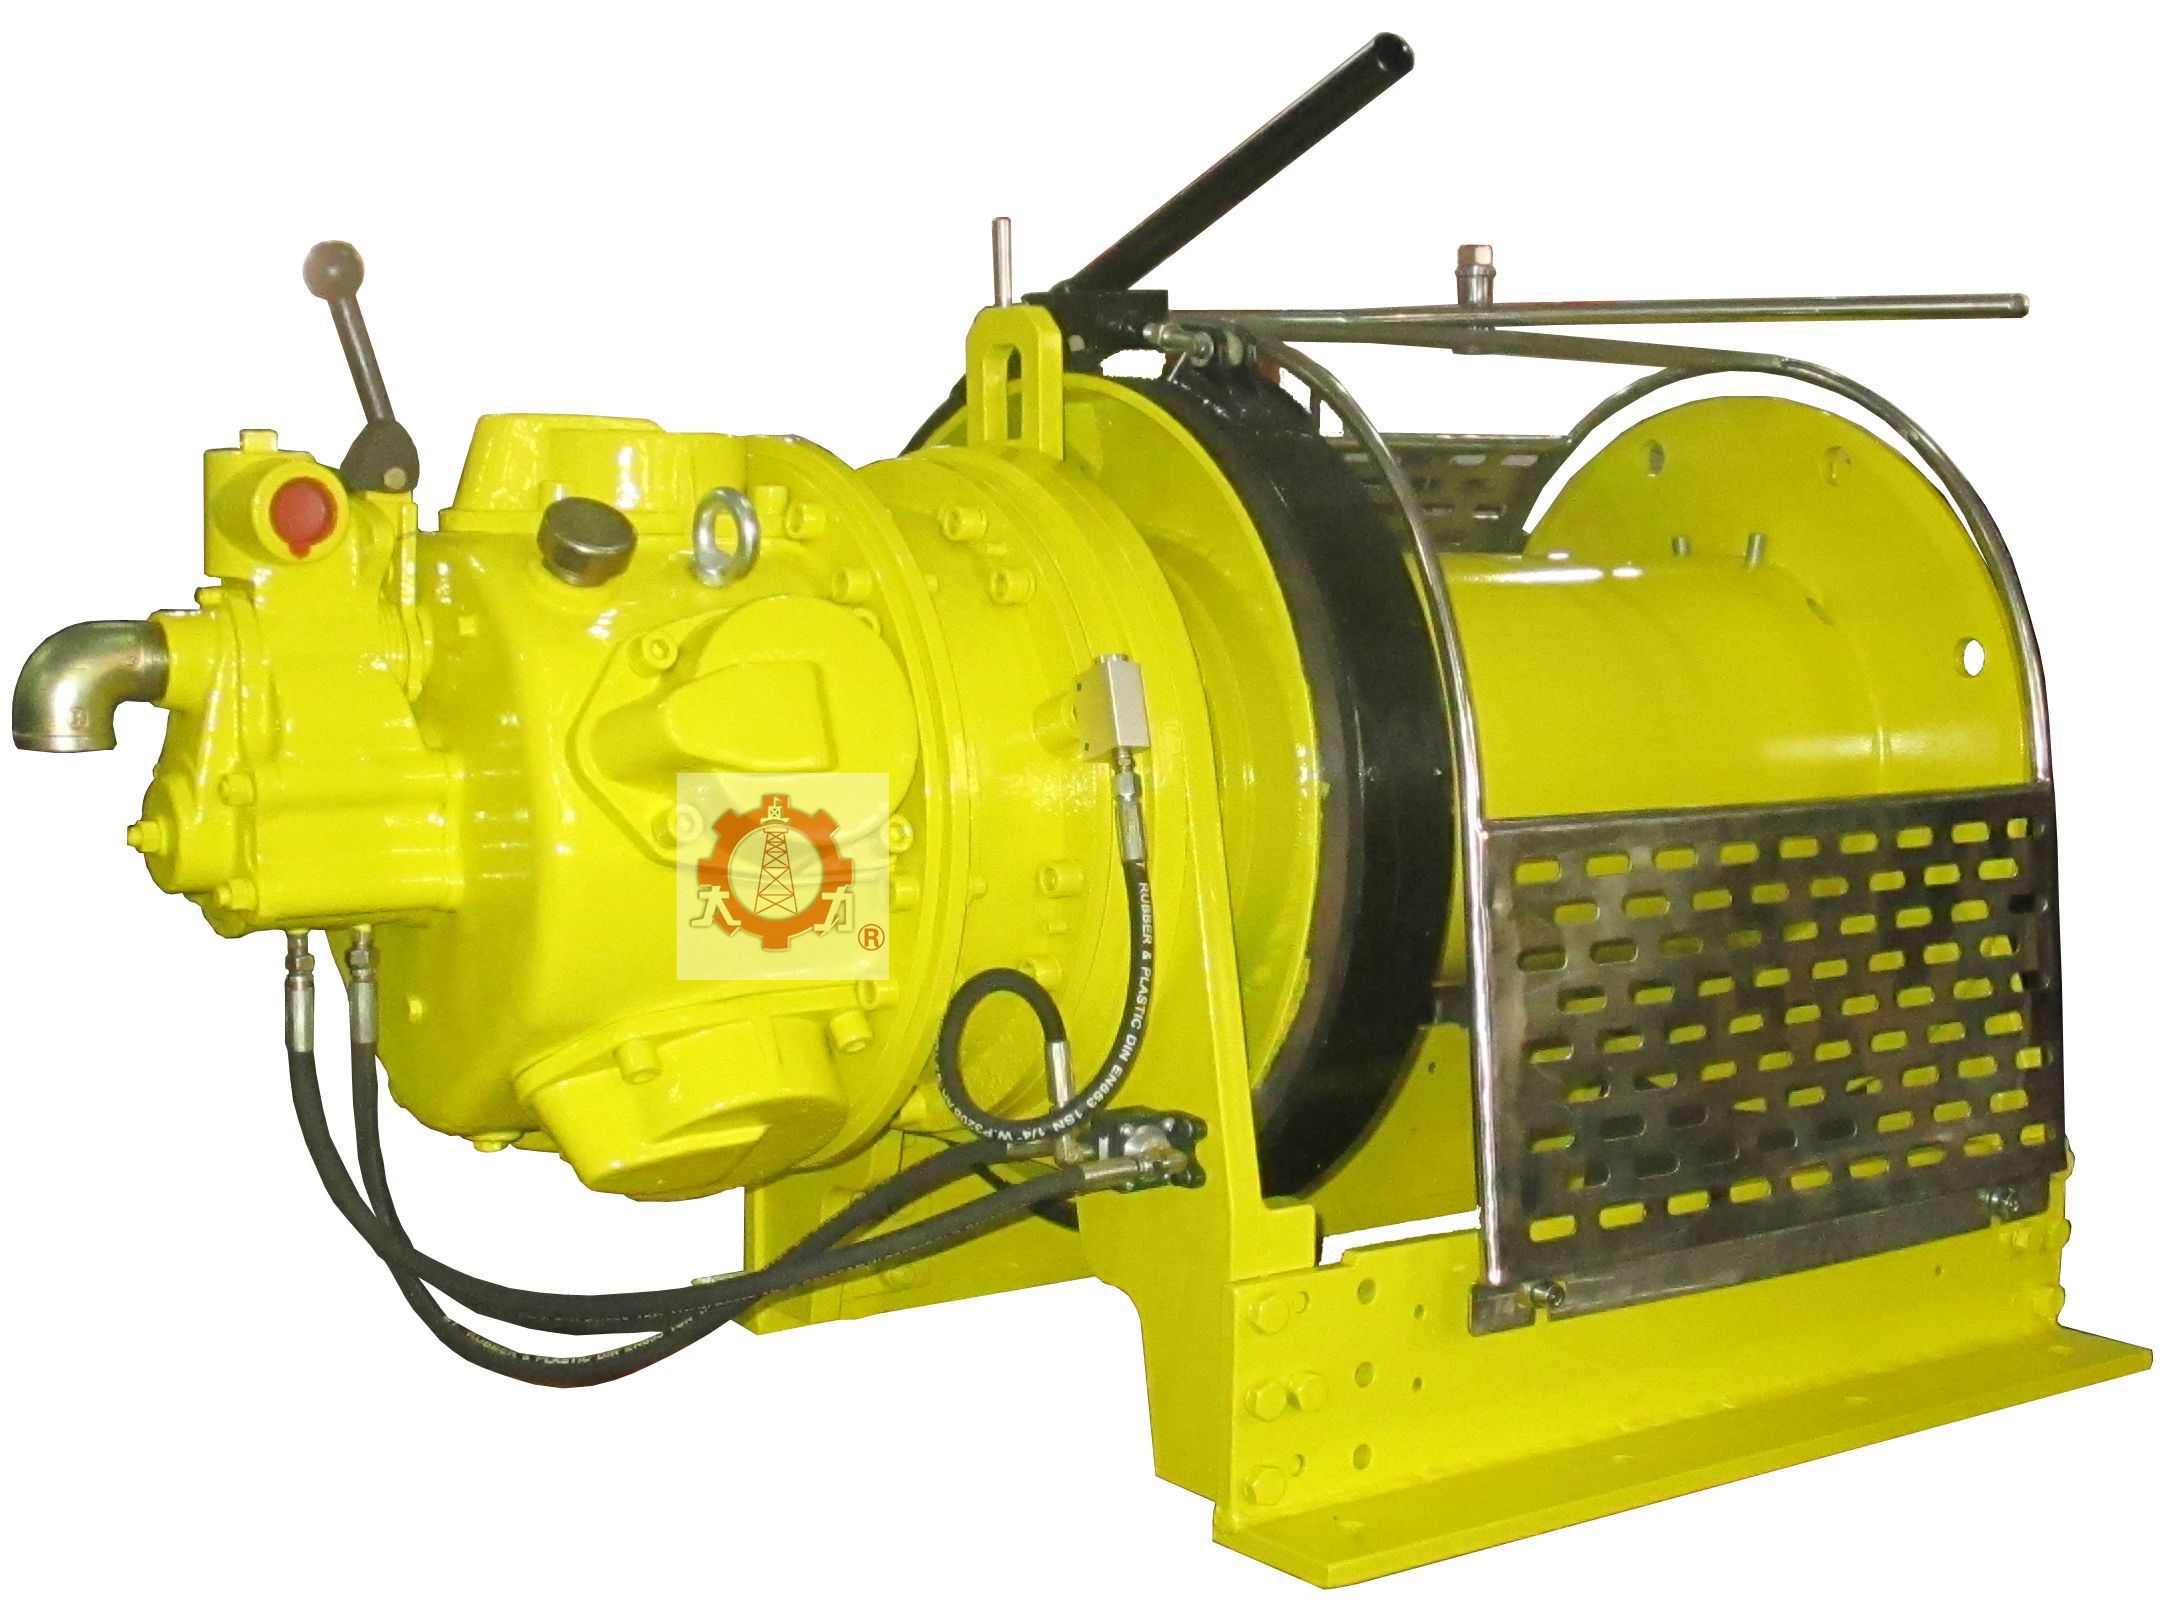  JQHS100 Air Winch (Disc Brake Type) With Supported Load of 6.25T